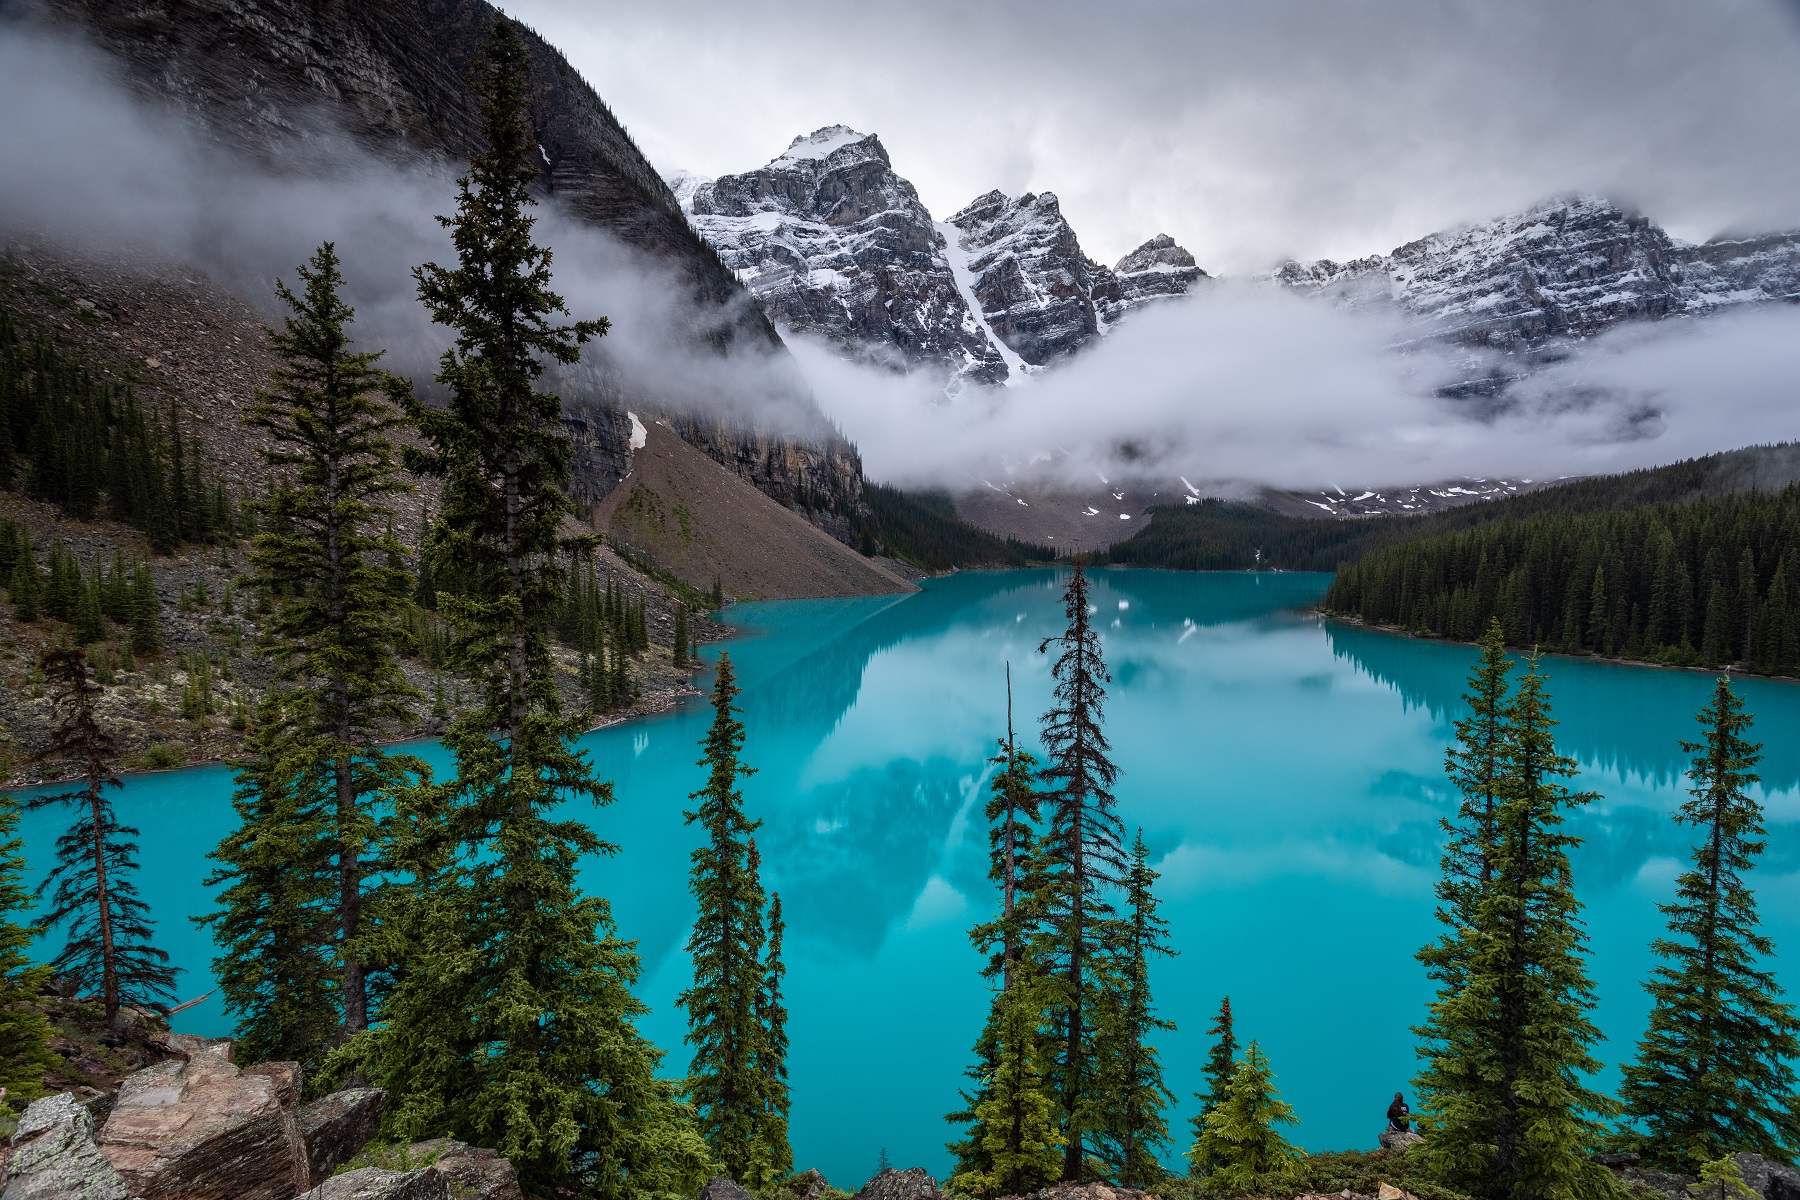 Moraine Lake - From Tofino to Banff: a 14-Day Itinerary in Western Canada